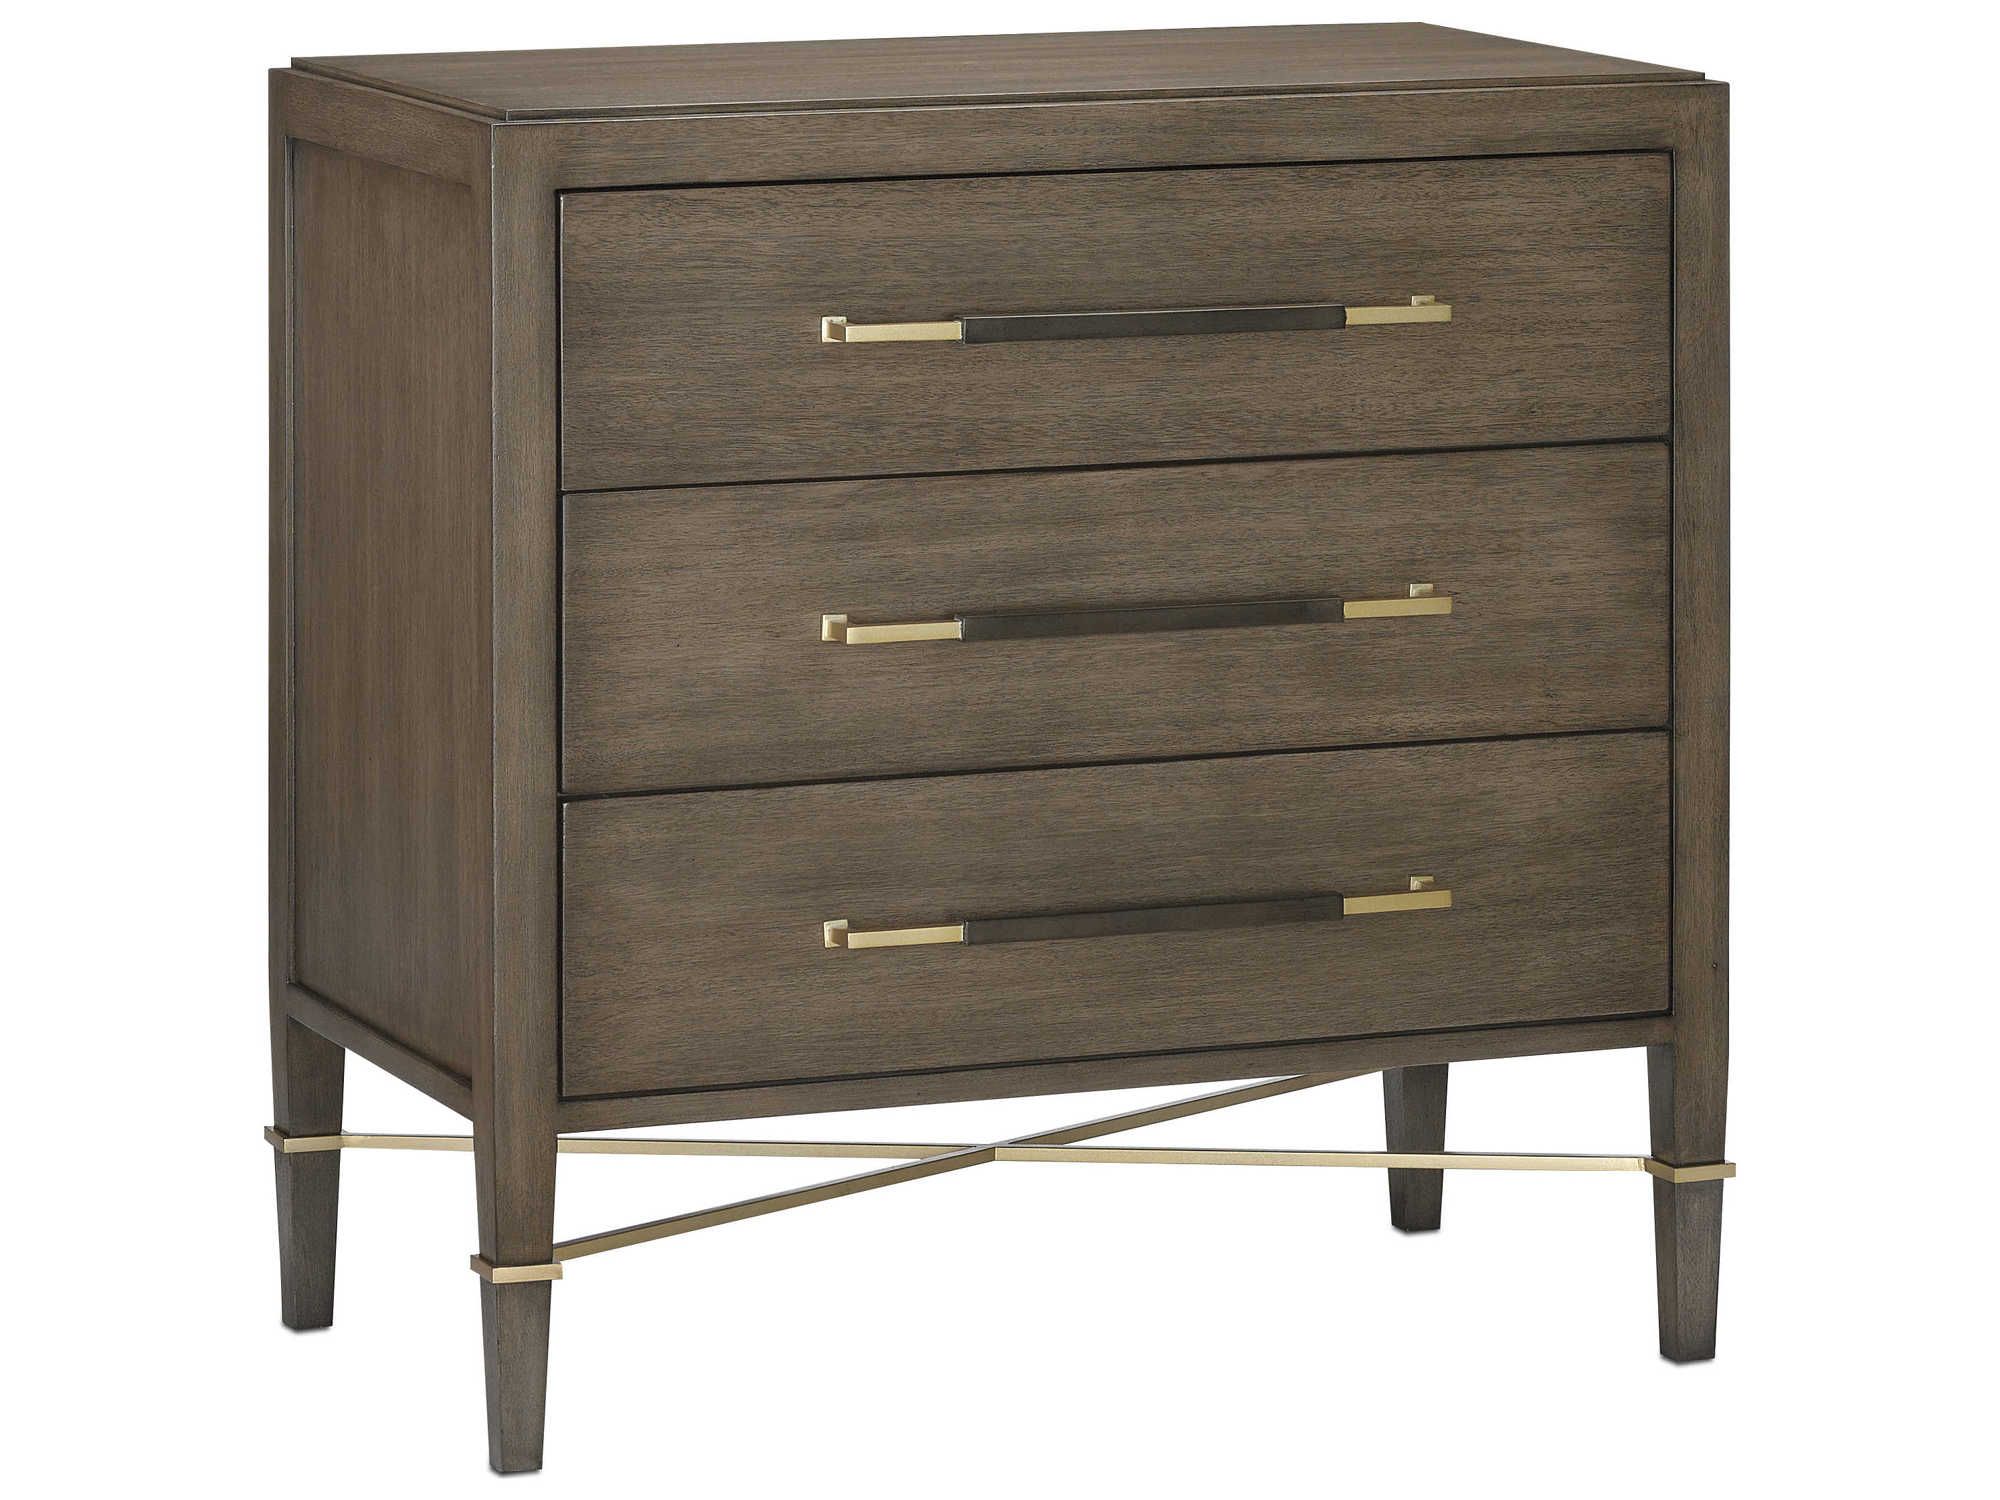 Currey & Company Verona Chanterelle / Coffee Champagne Three Drawer Intended For Chanterelle 3 Drawer Desks (View 1 of 9)